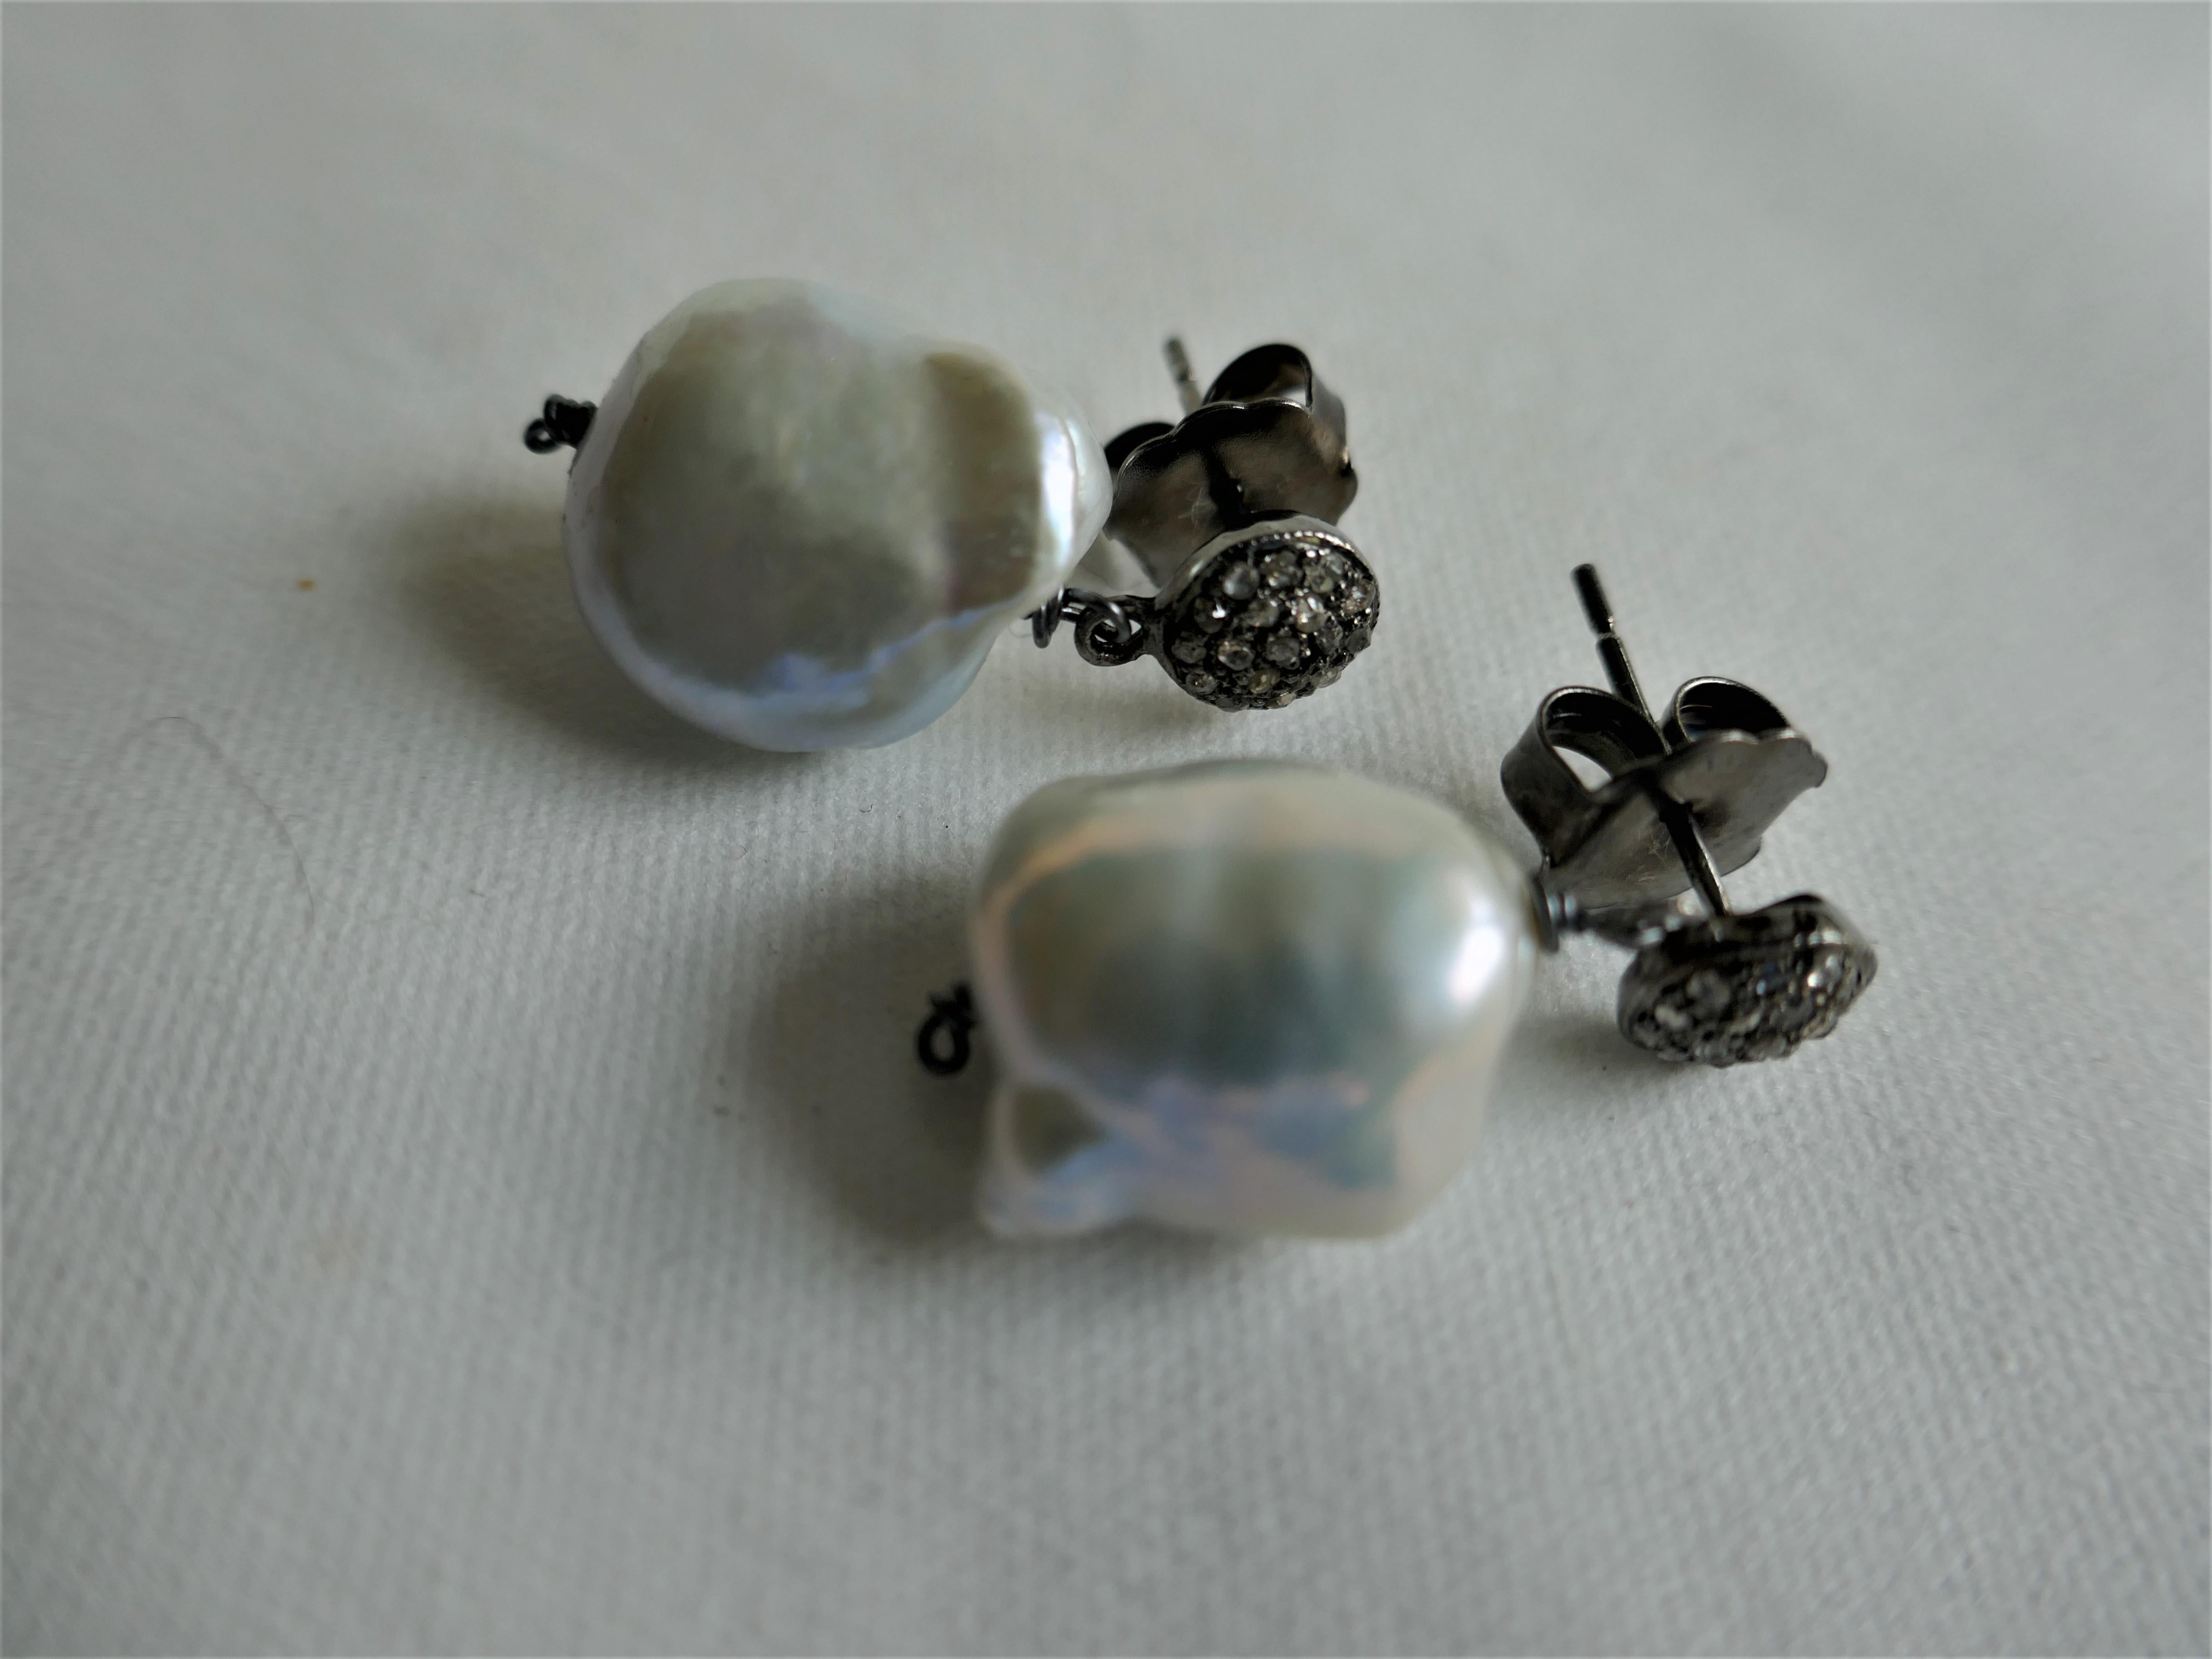 White Baroque Souffle Cultured Pearls 925 Oxidized Silver Diamond Post Earrings In New Condition For Sale In Coral Gables, FL